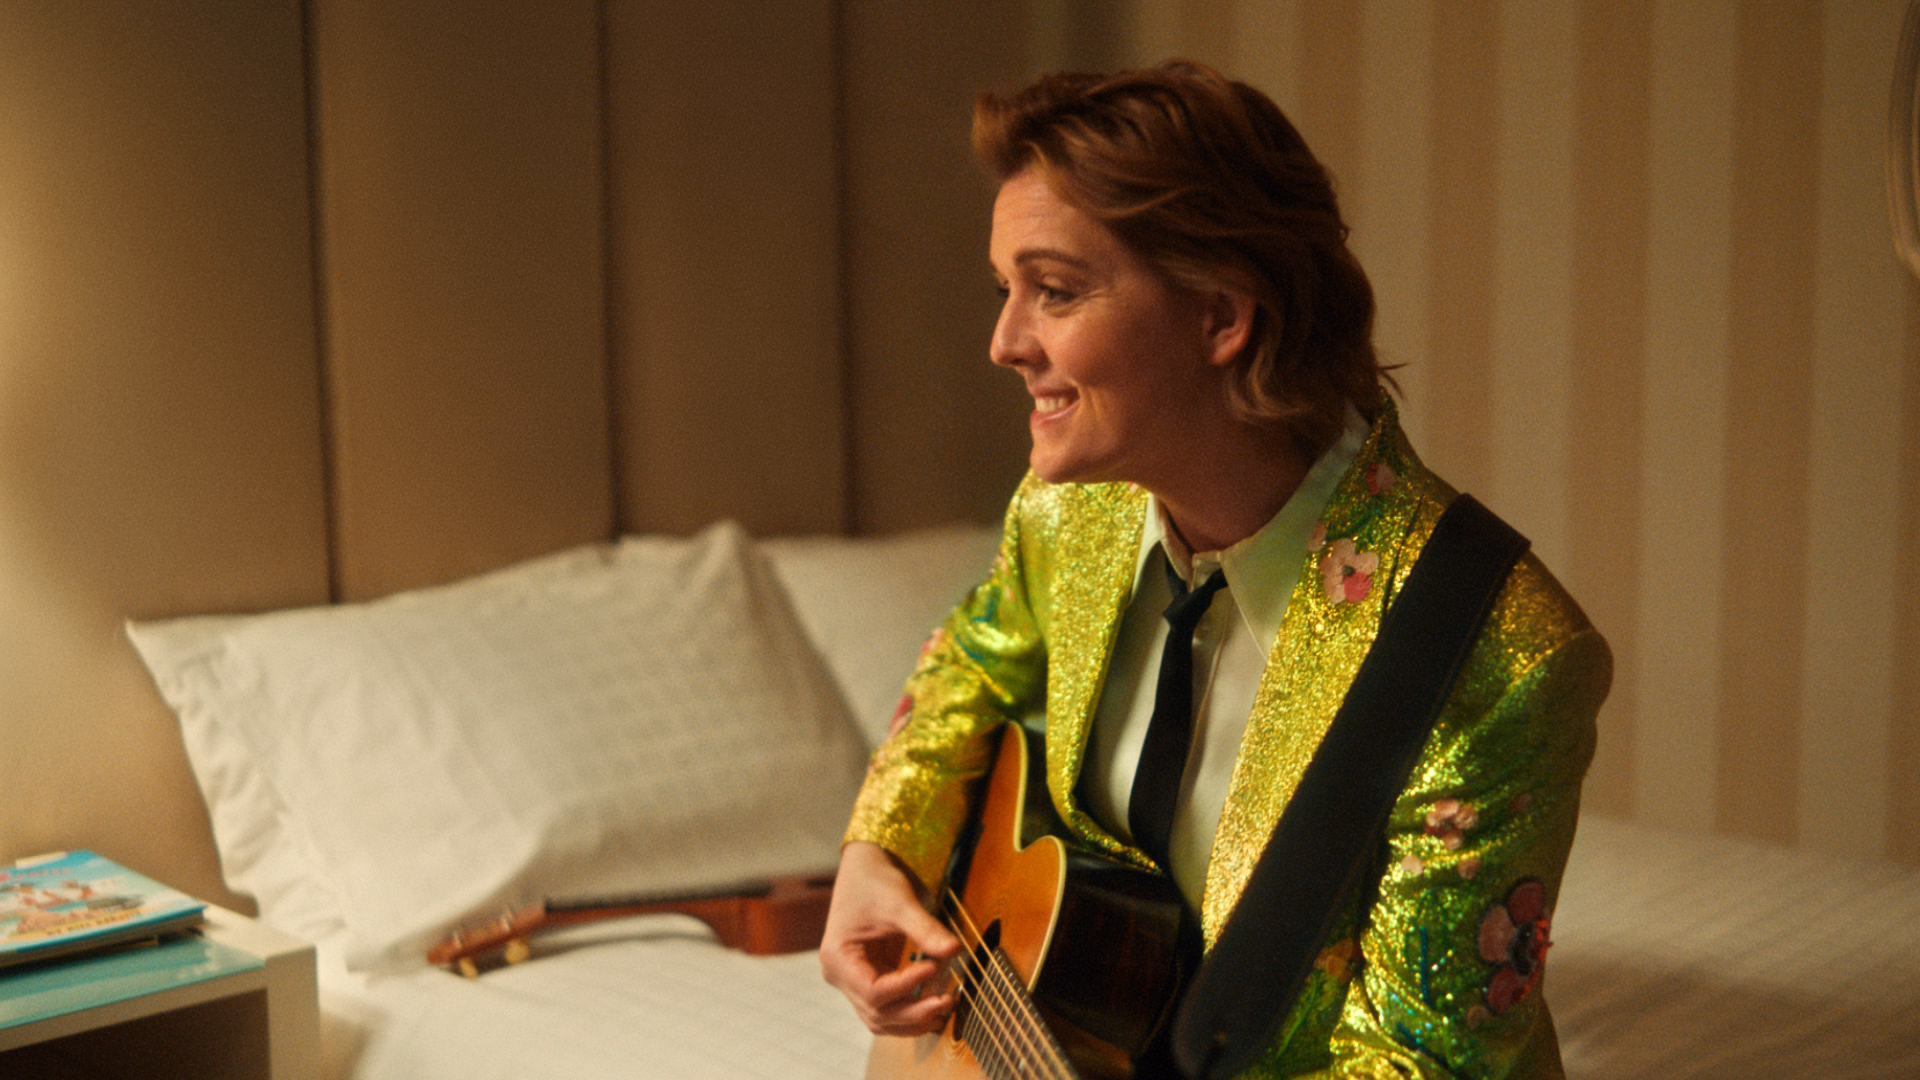 Hilton Connecting Room Concerts with Brandi Carlile